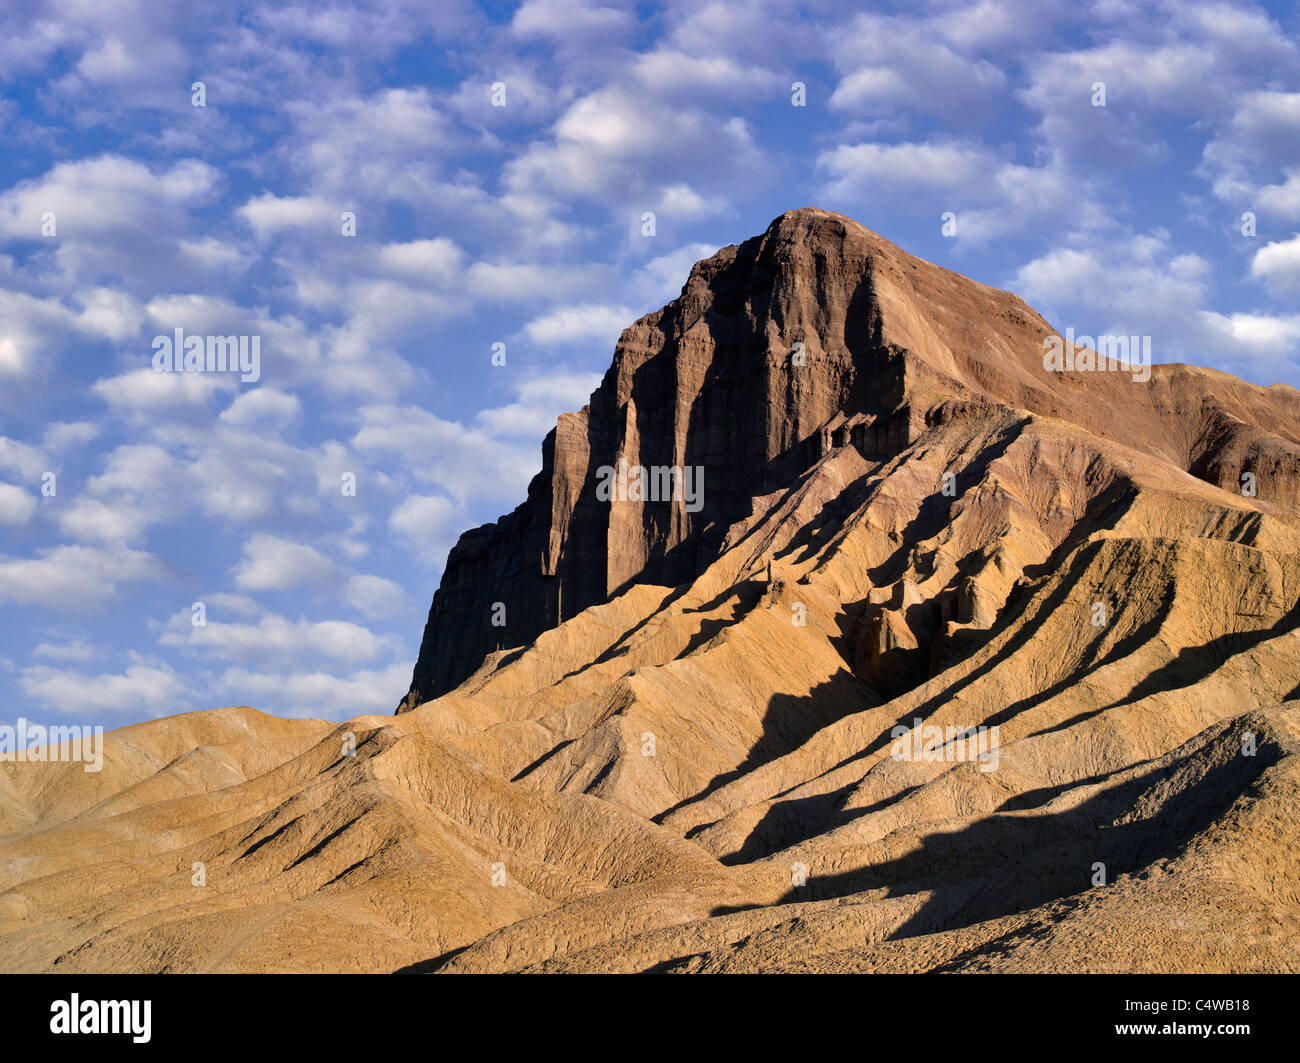 Manly peak as seen from Golden Canyon Trail. Death Valley National Park, California. Sky has been added. Stock Photo